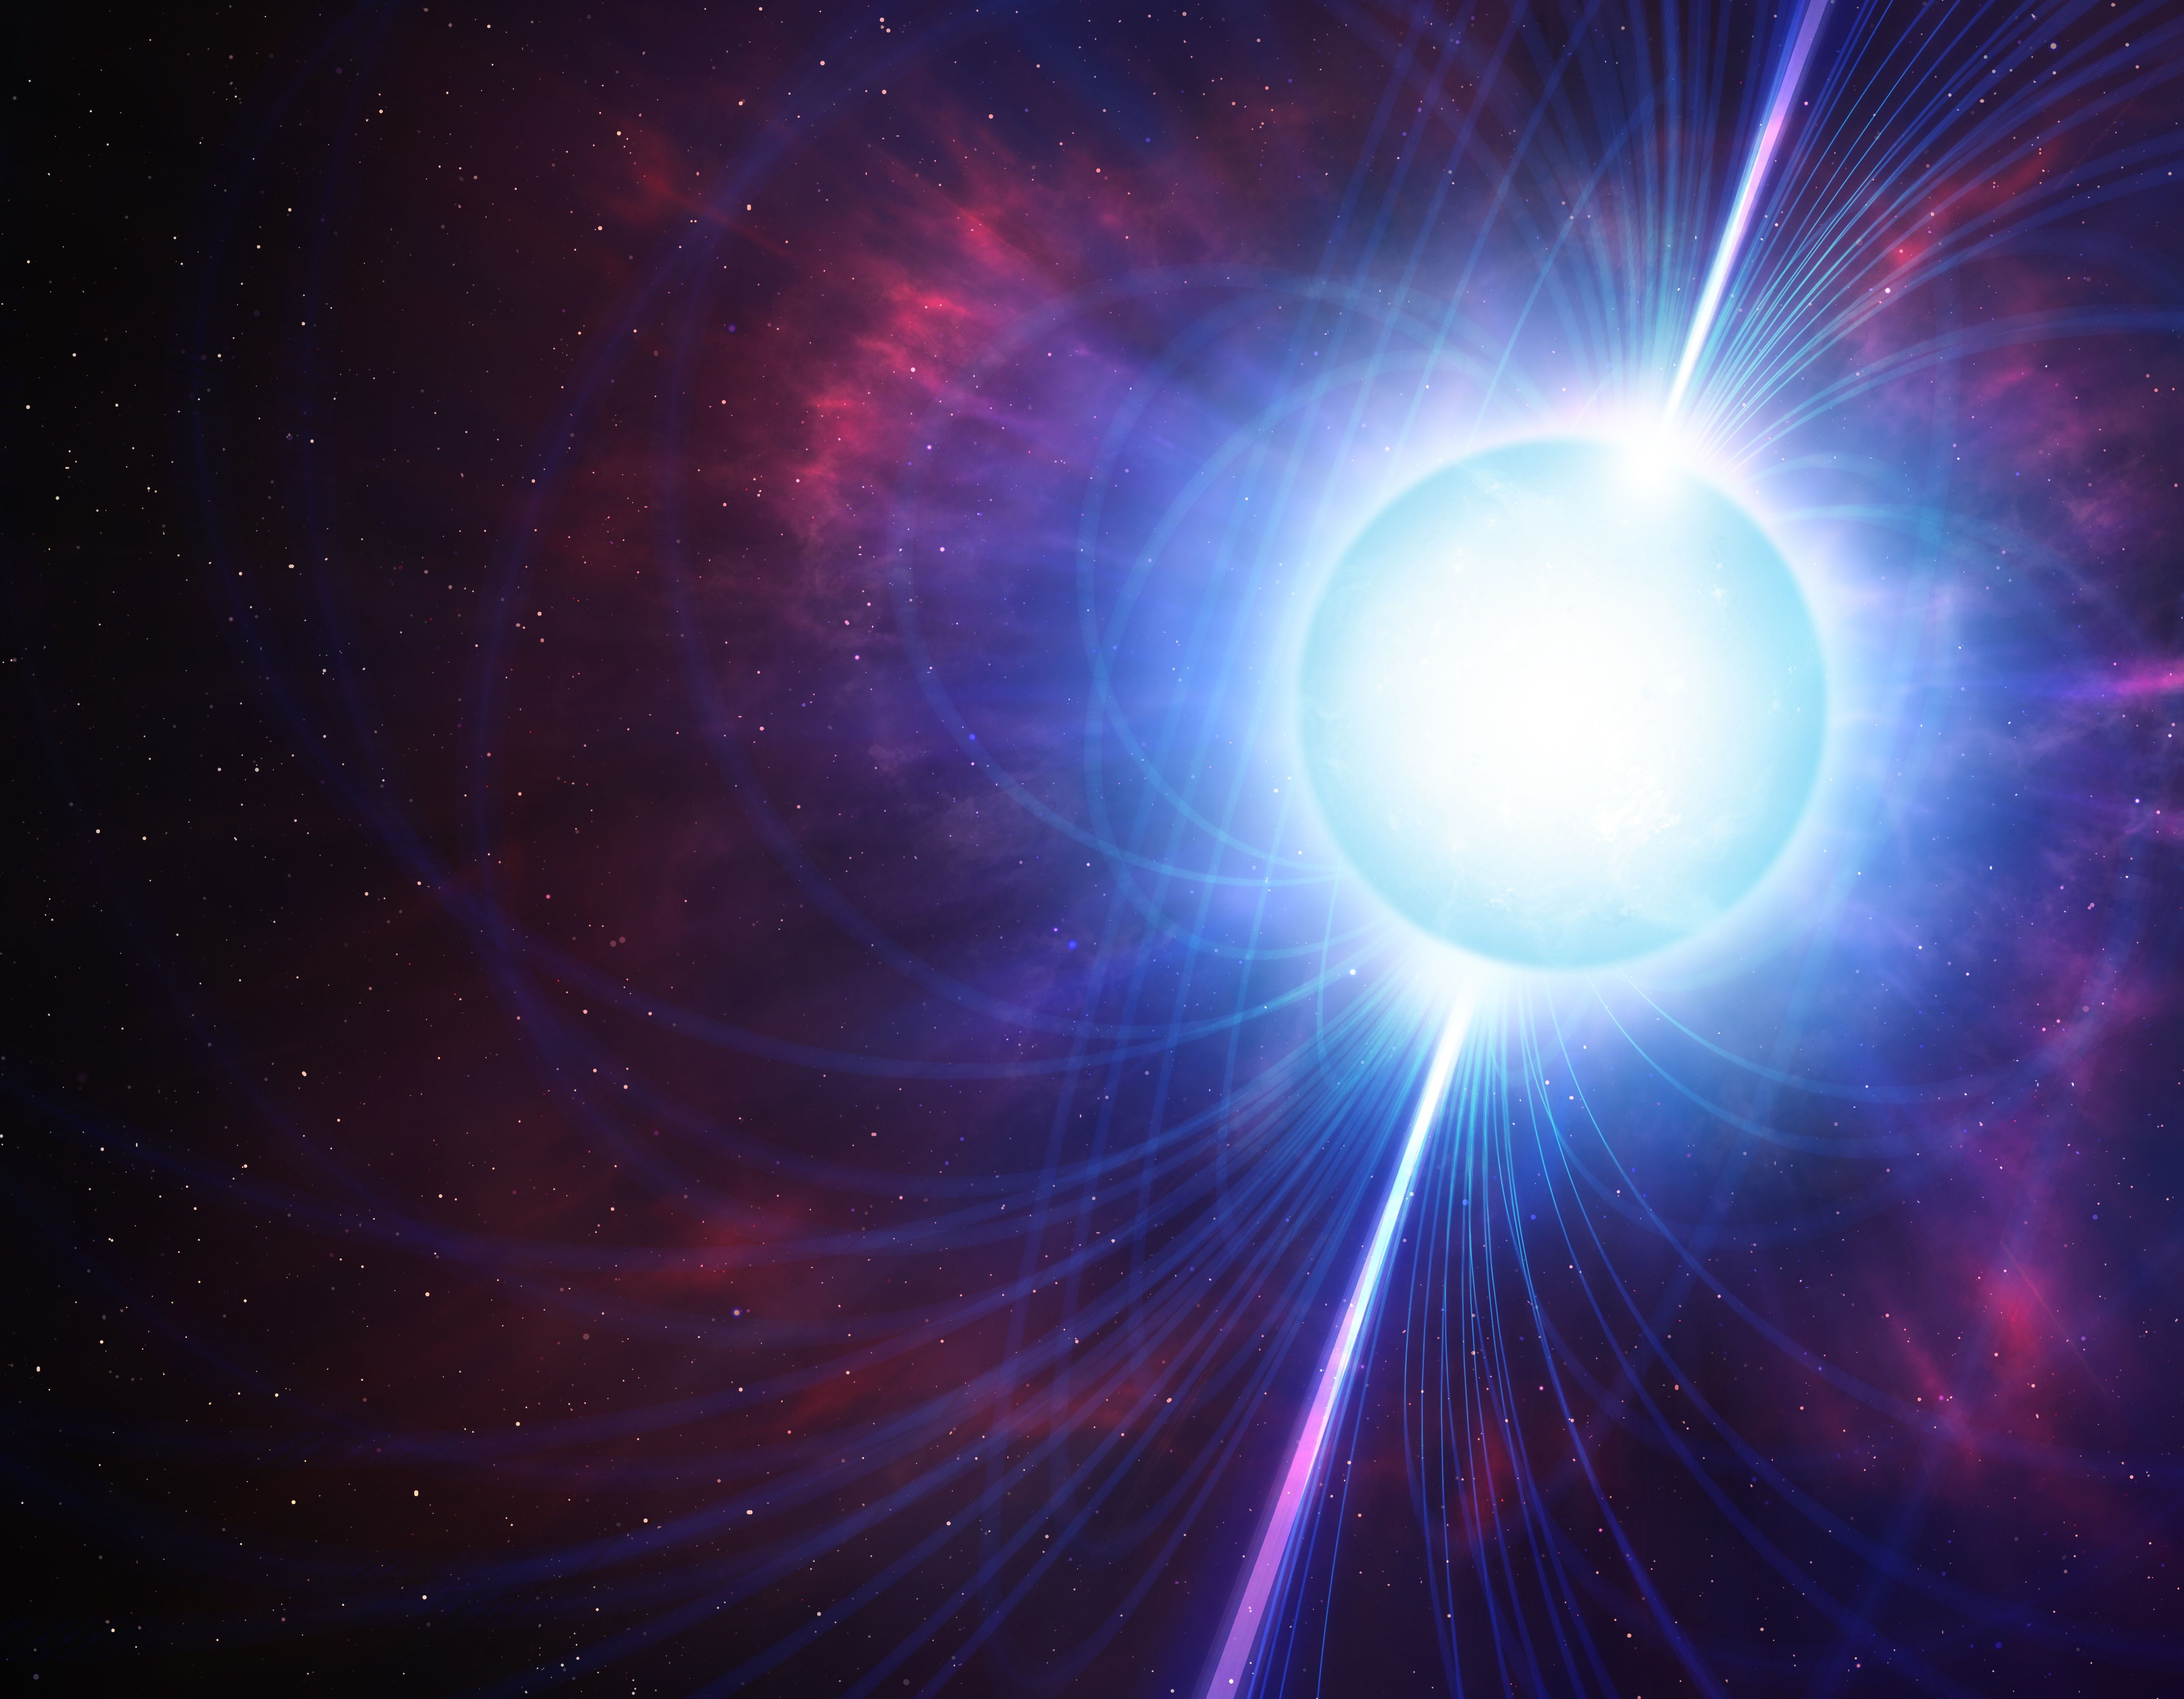 What are pulsars?